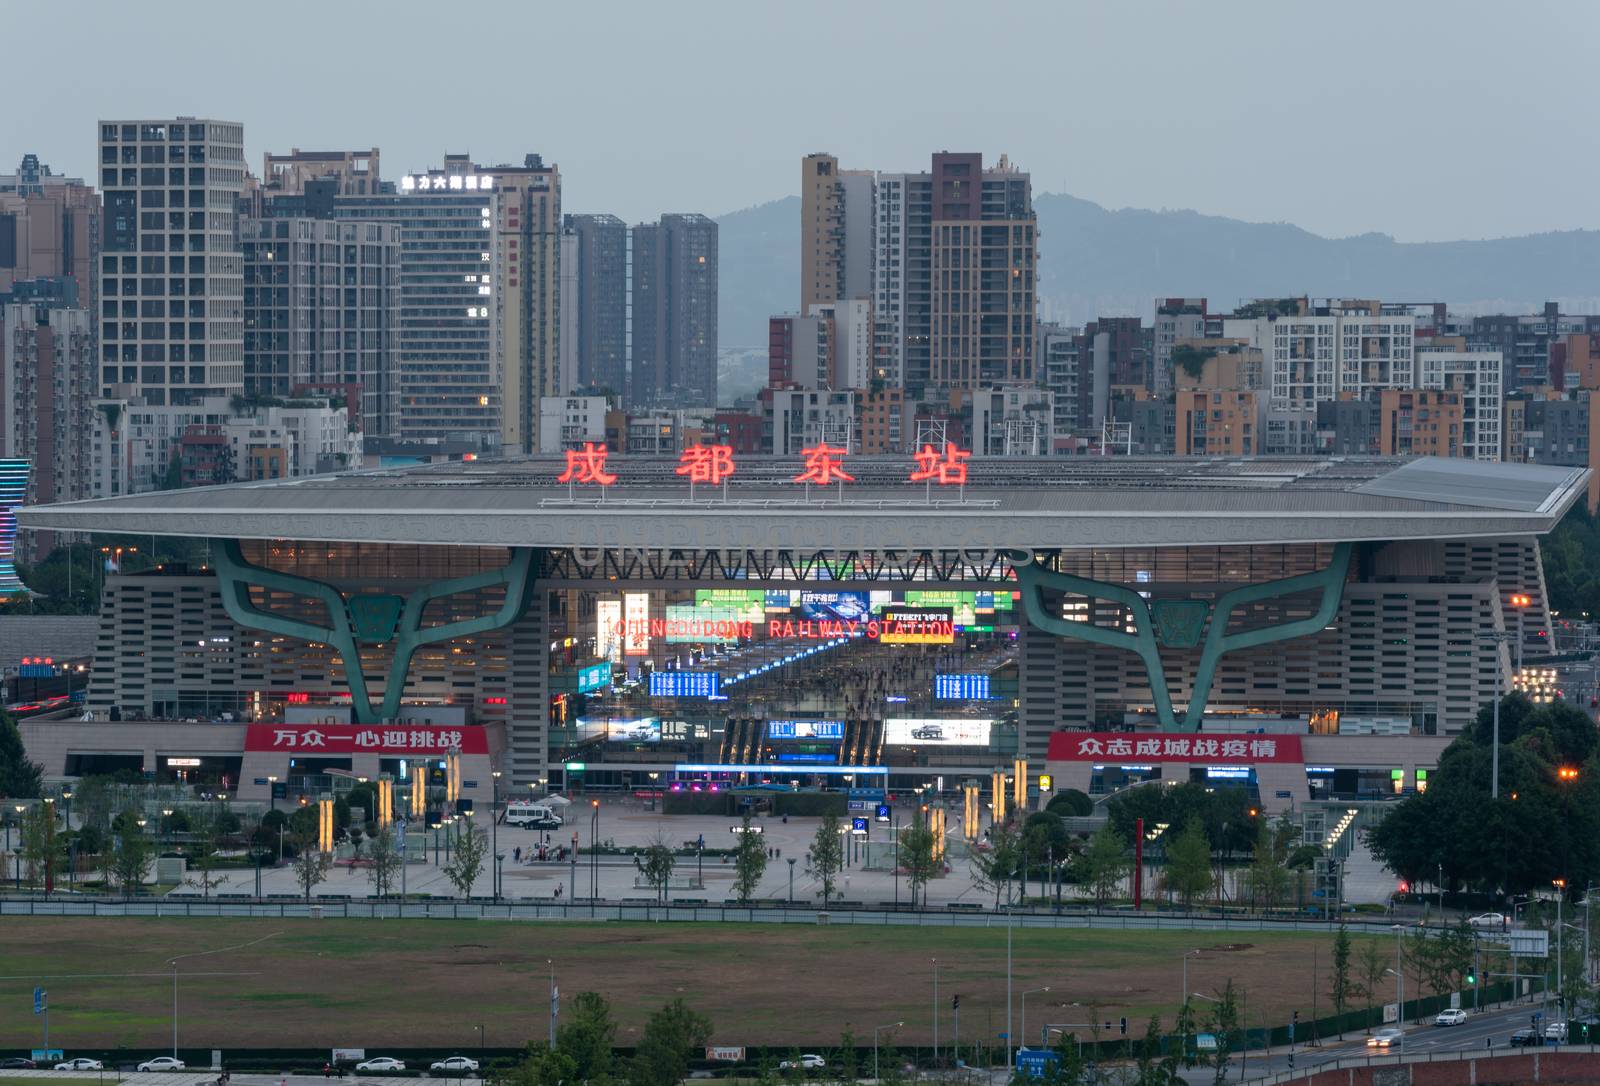 Chengdu Dong East railway station aerial view at dusk by LP2Studio